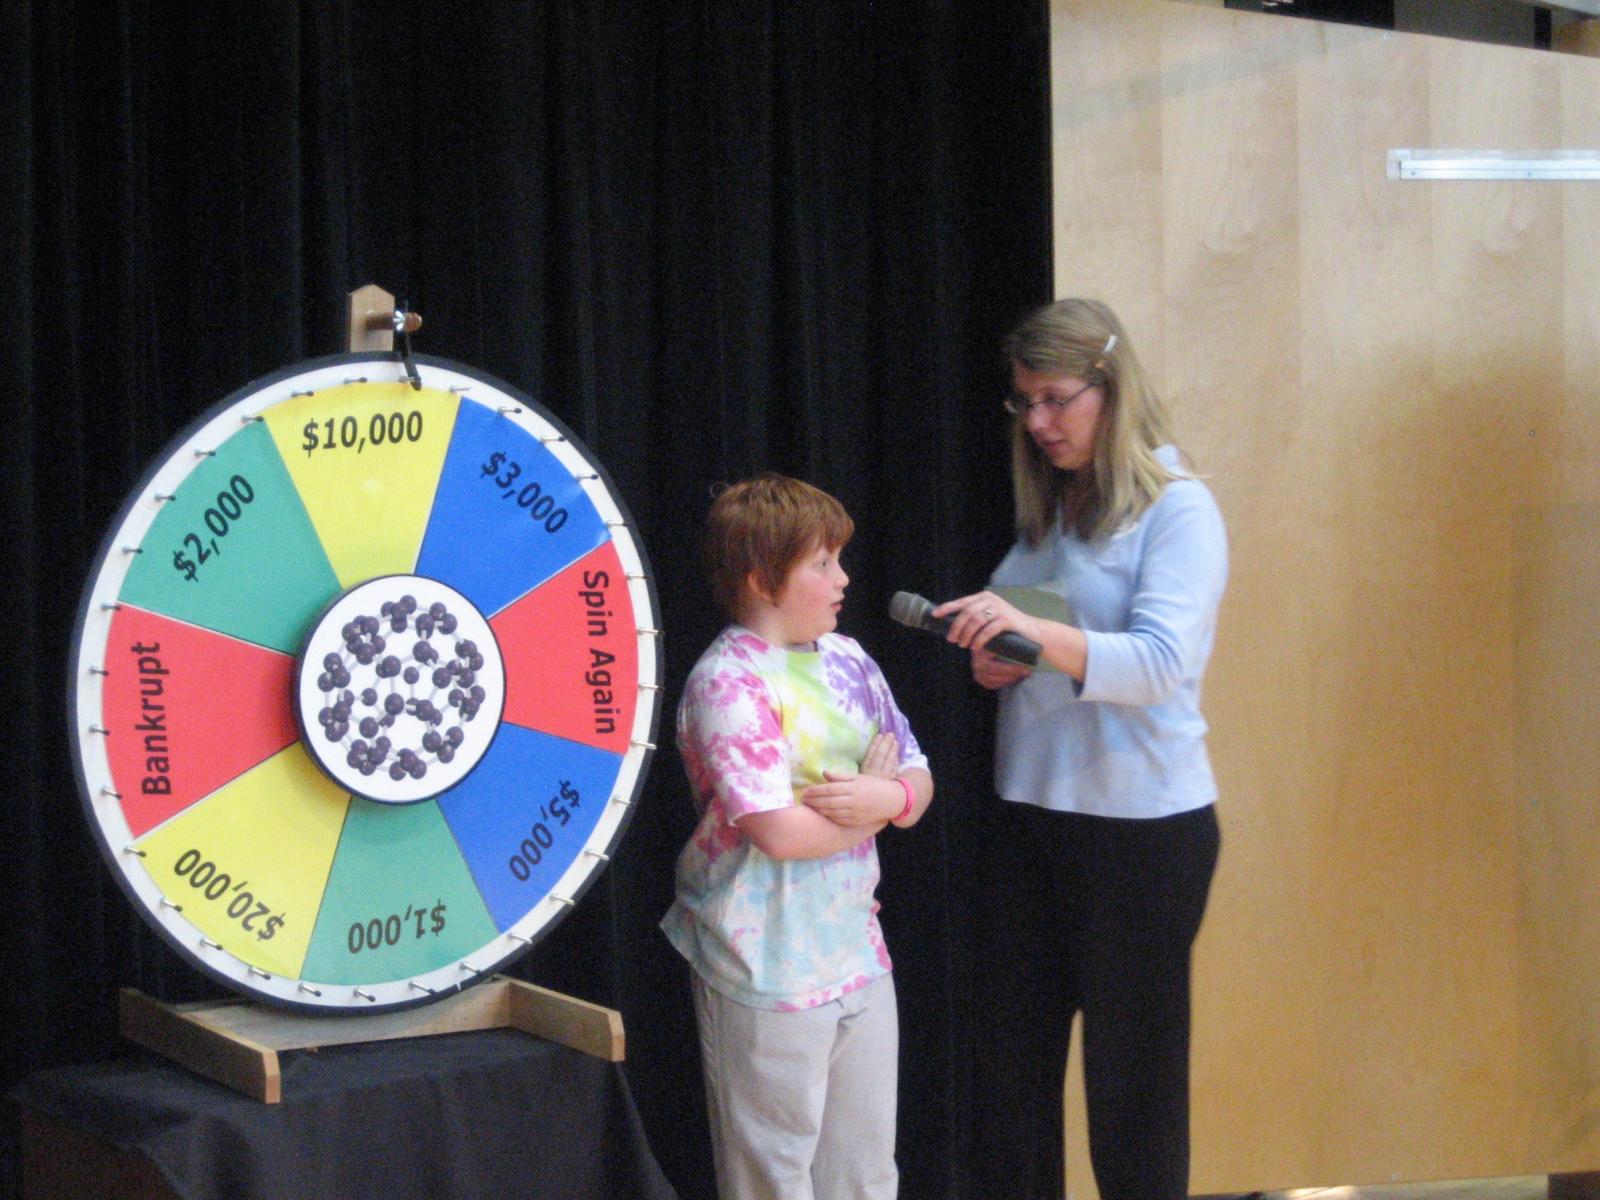 A facilitator on stage in front of a large spinning wheel asking a participant a question with a microphone